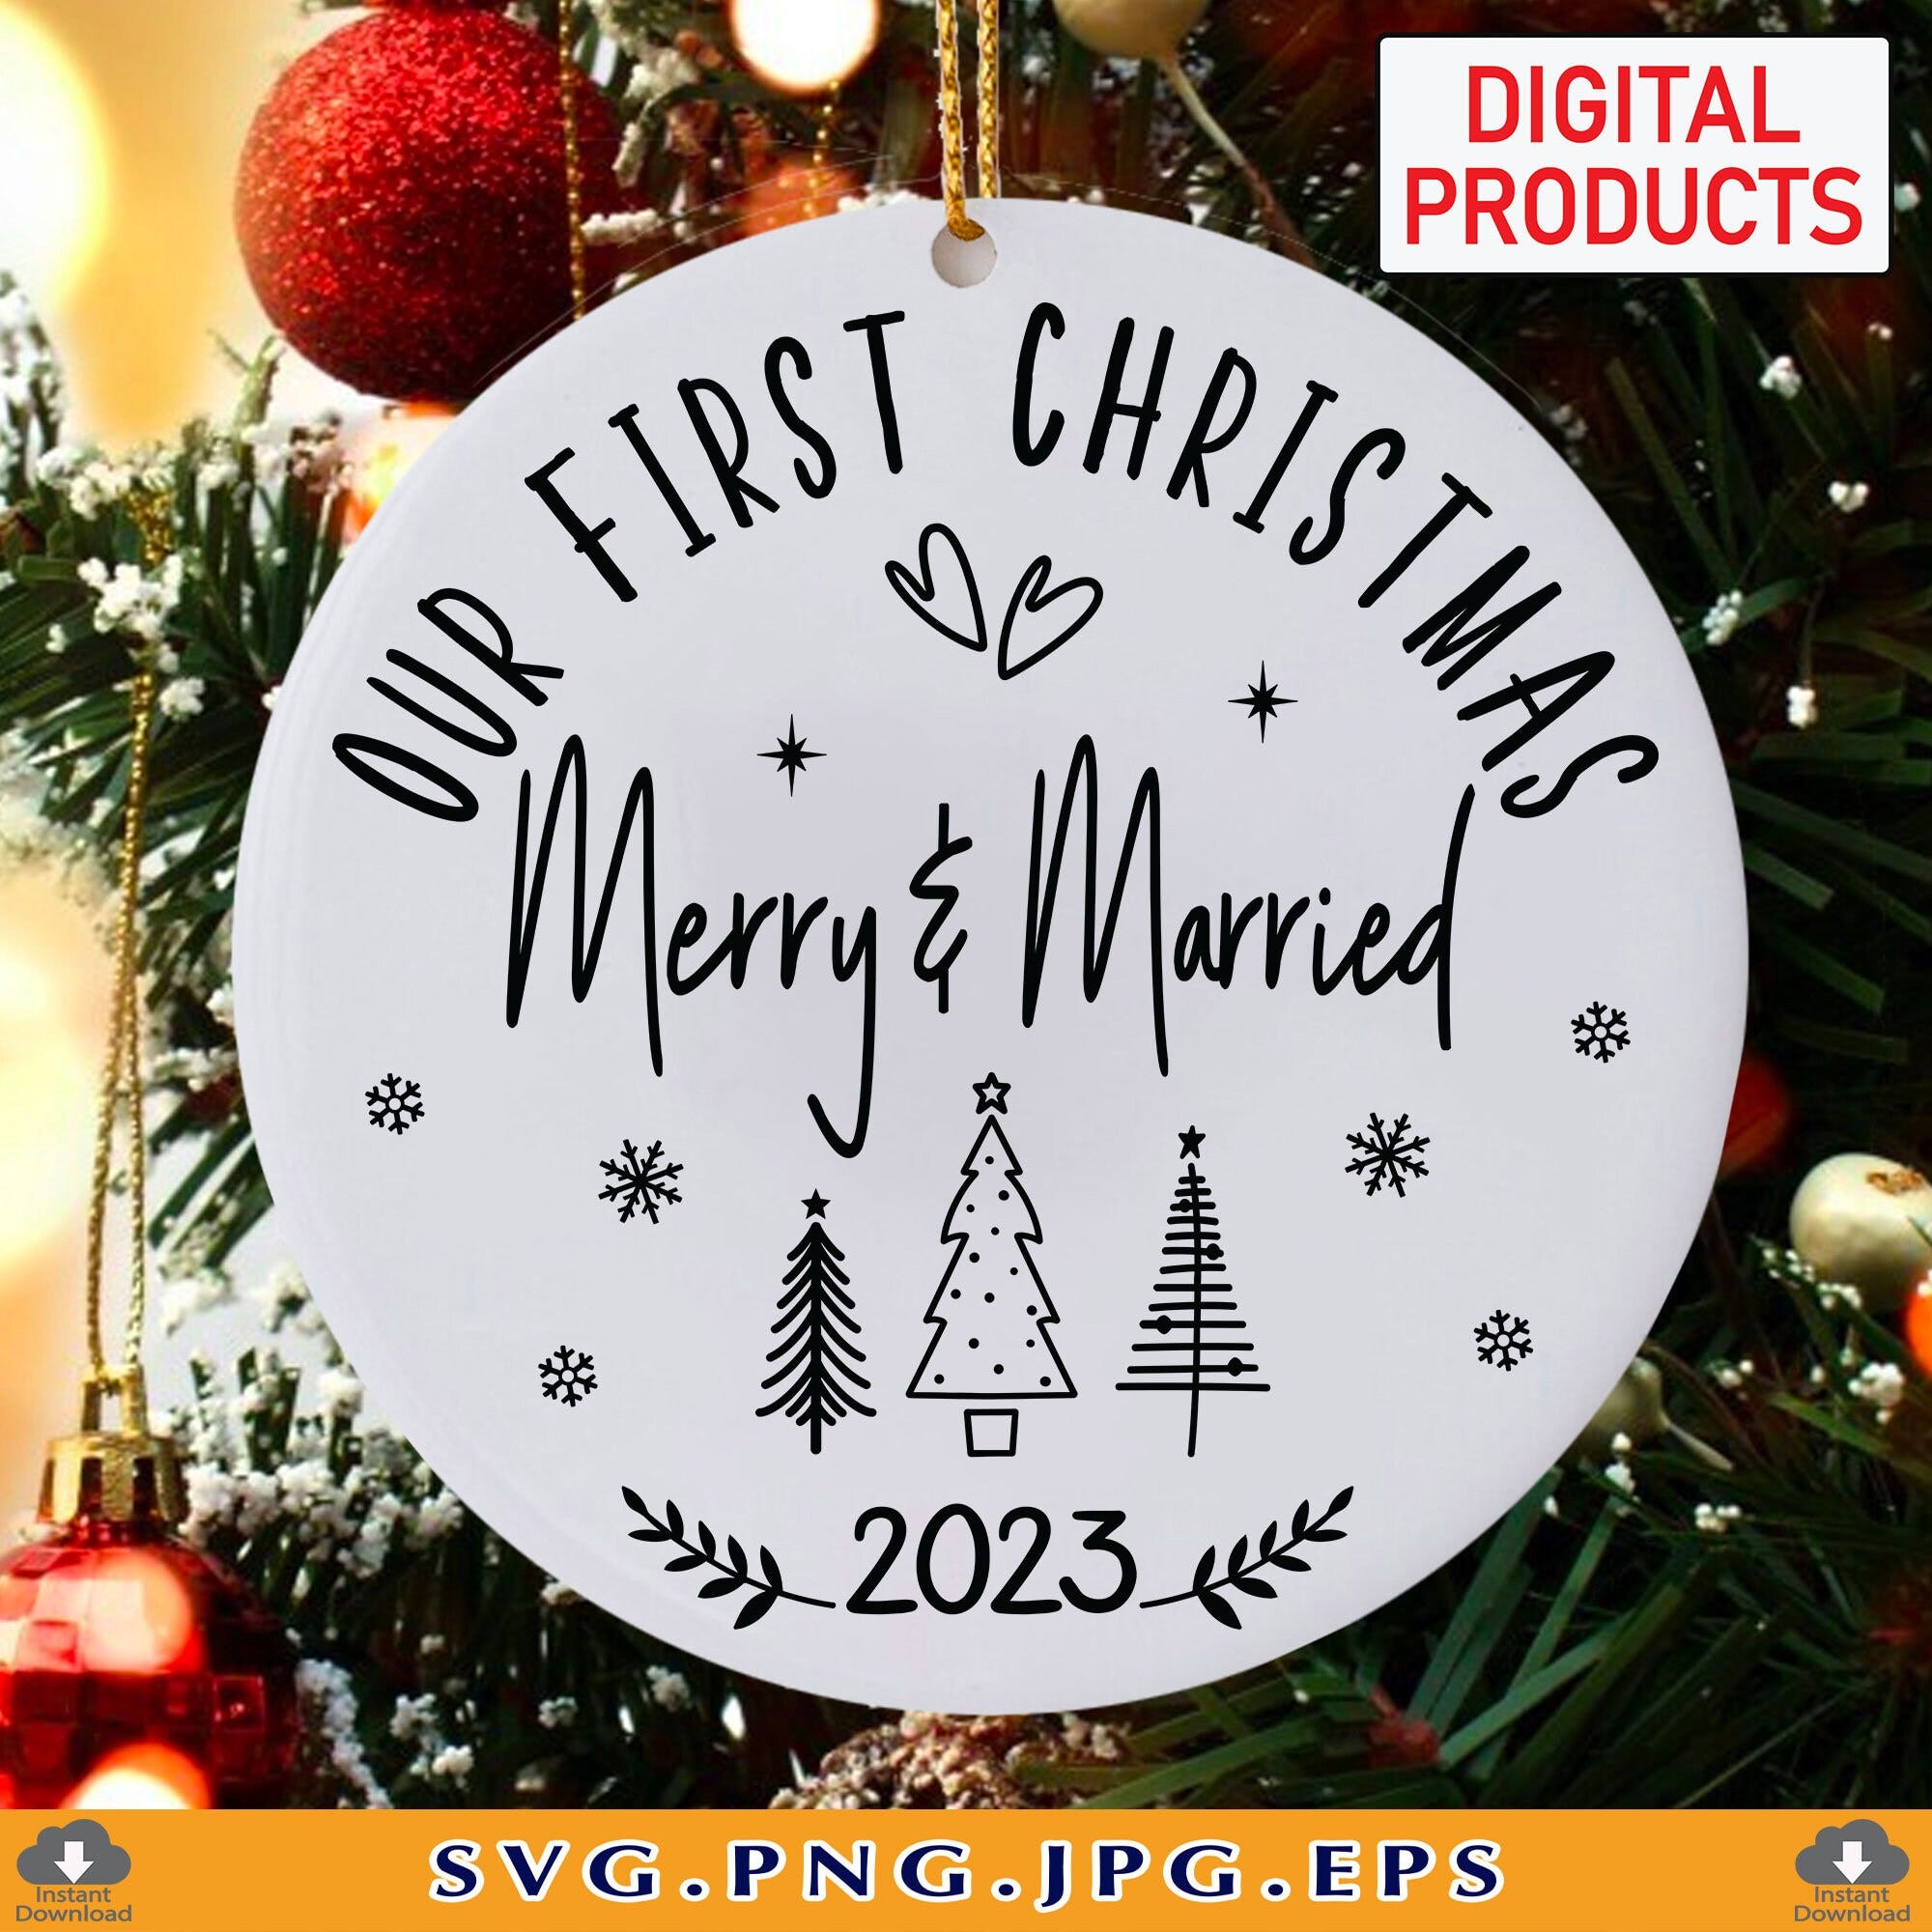 Our First Christmas Merry & Married, 2023 Christmas Ornament SVG, Wedding Ornament SVG, Couples Christmas Gift,Cut Files For Cricut, Svg,PNG